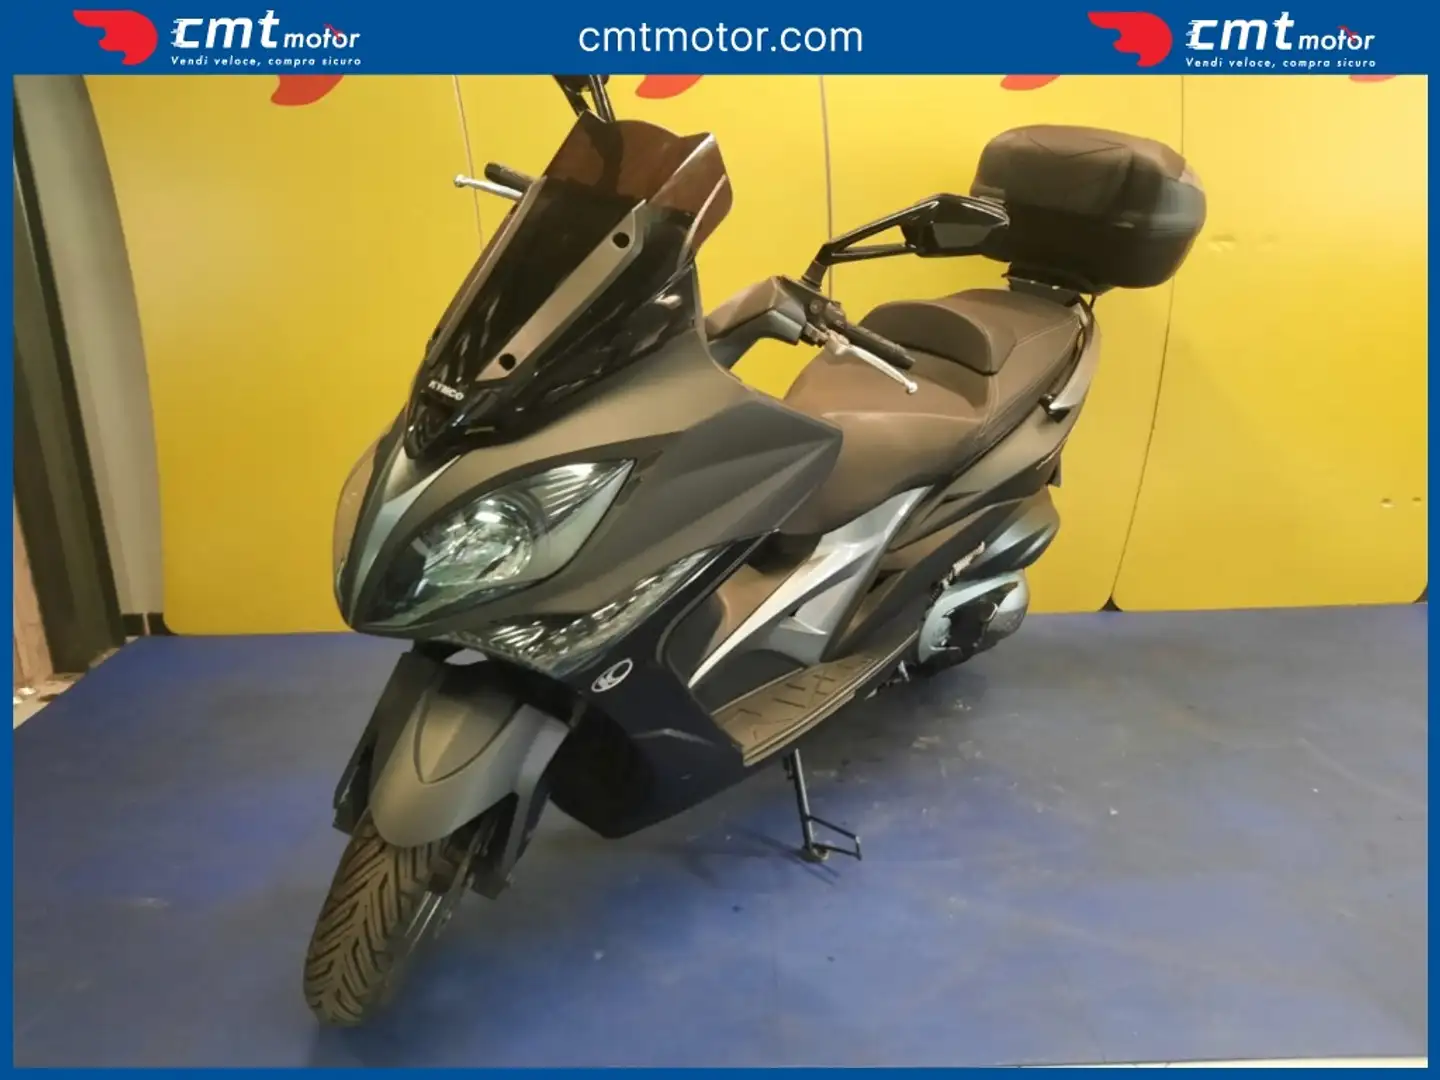 Kymco Xciting 400i ABS - 2